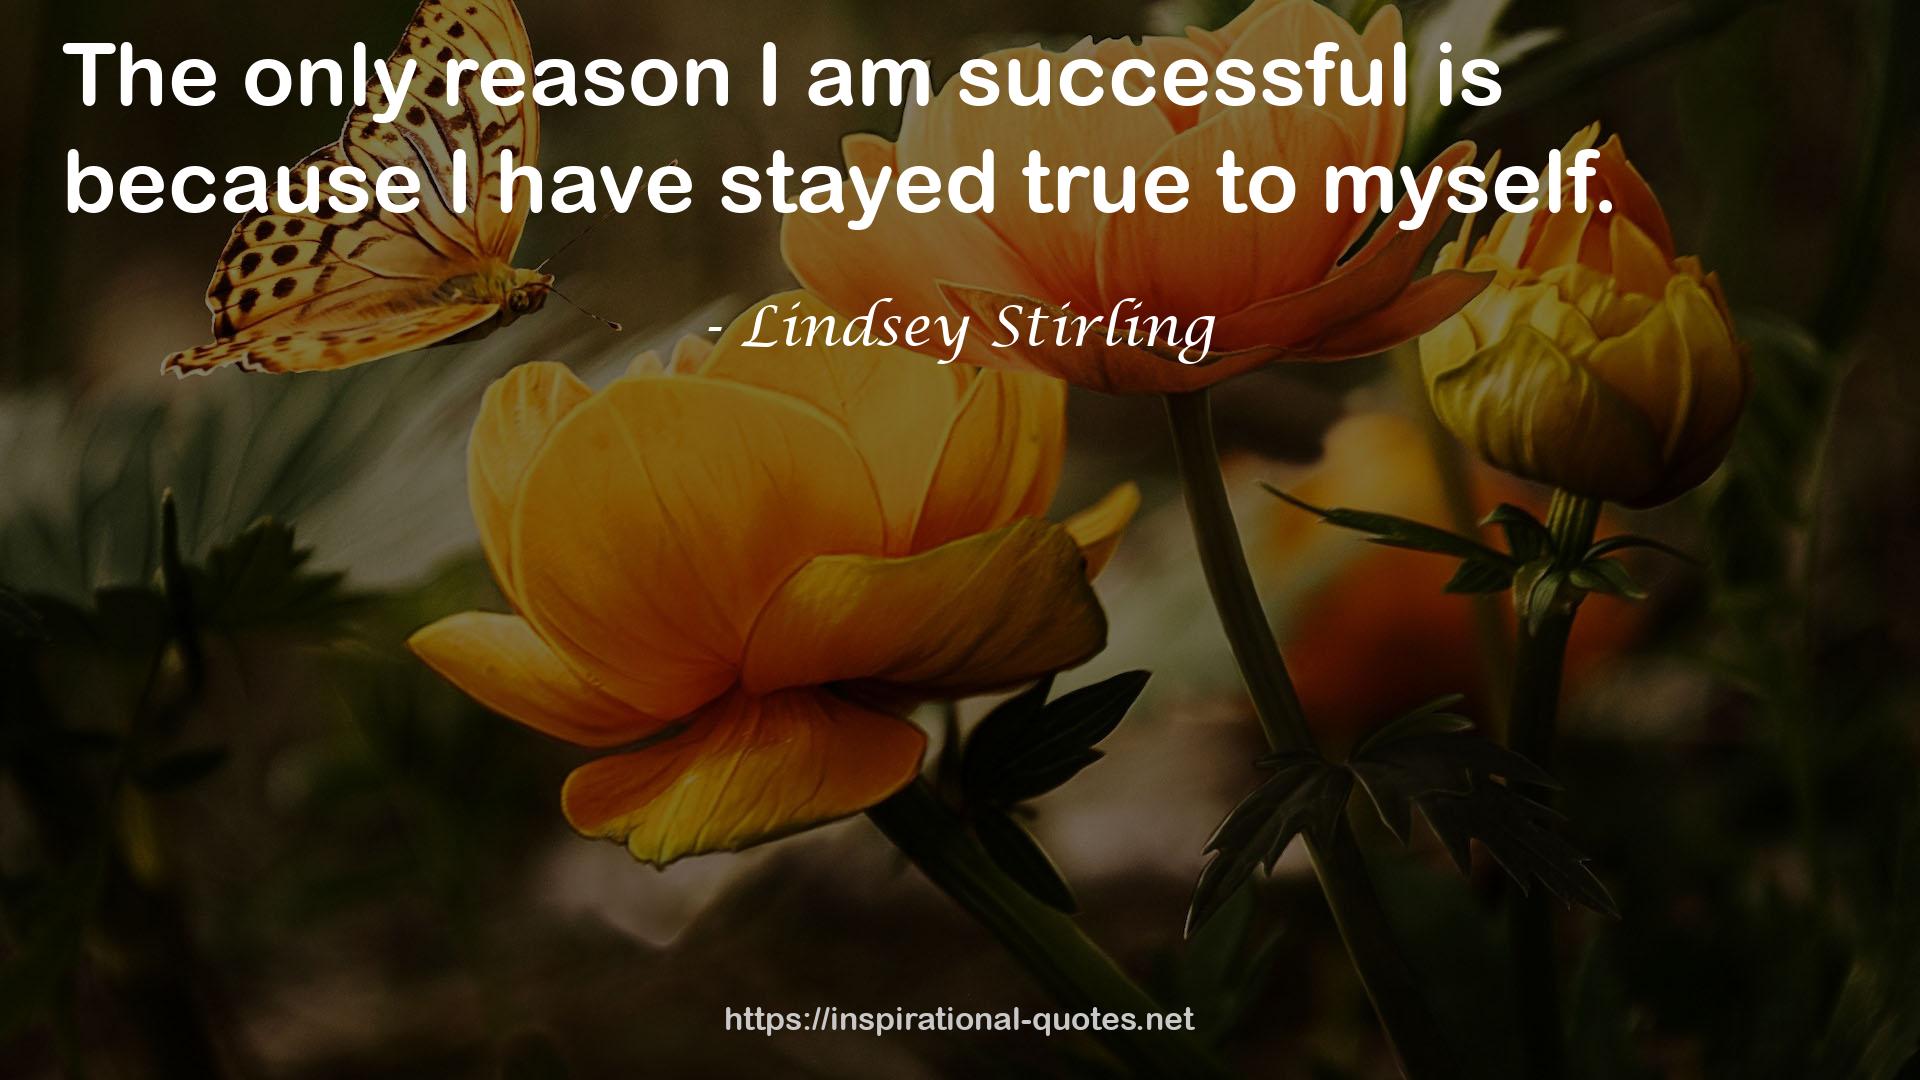 Lindsey Stirling QUOTES